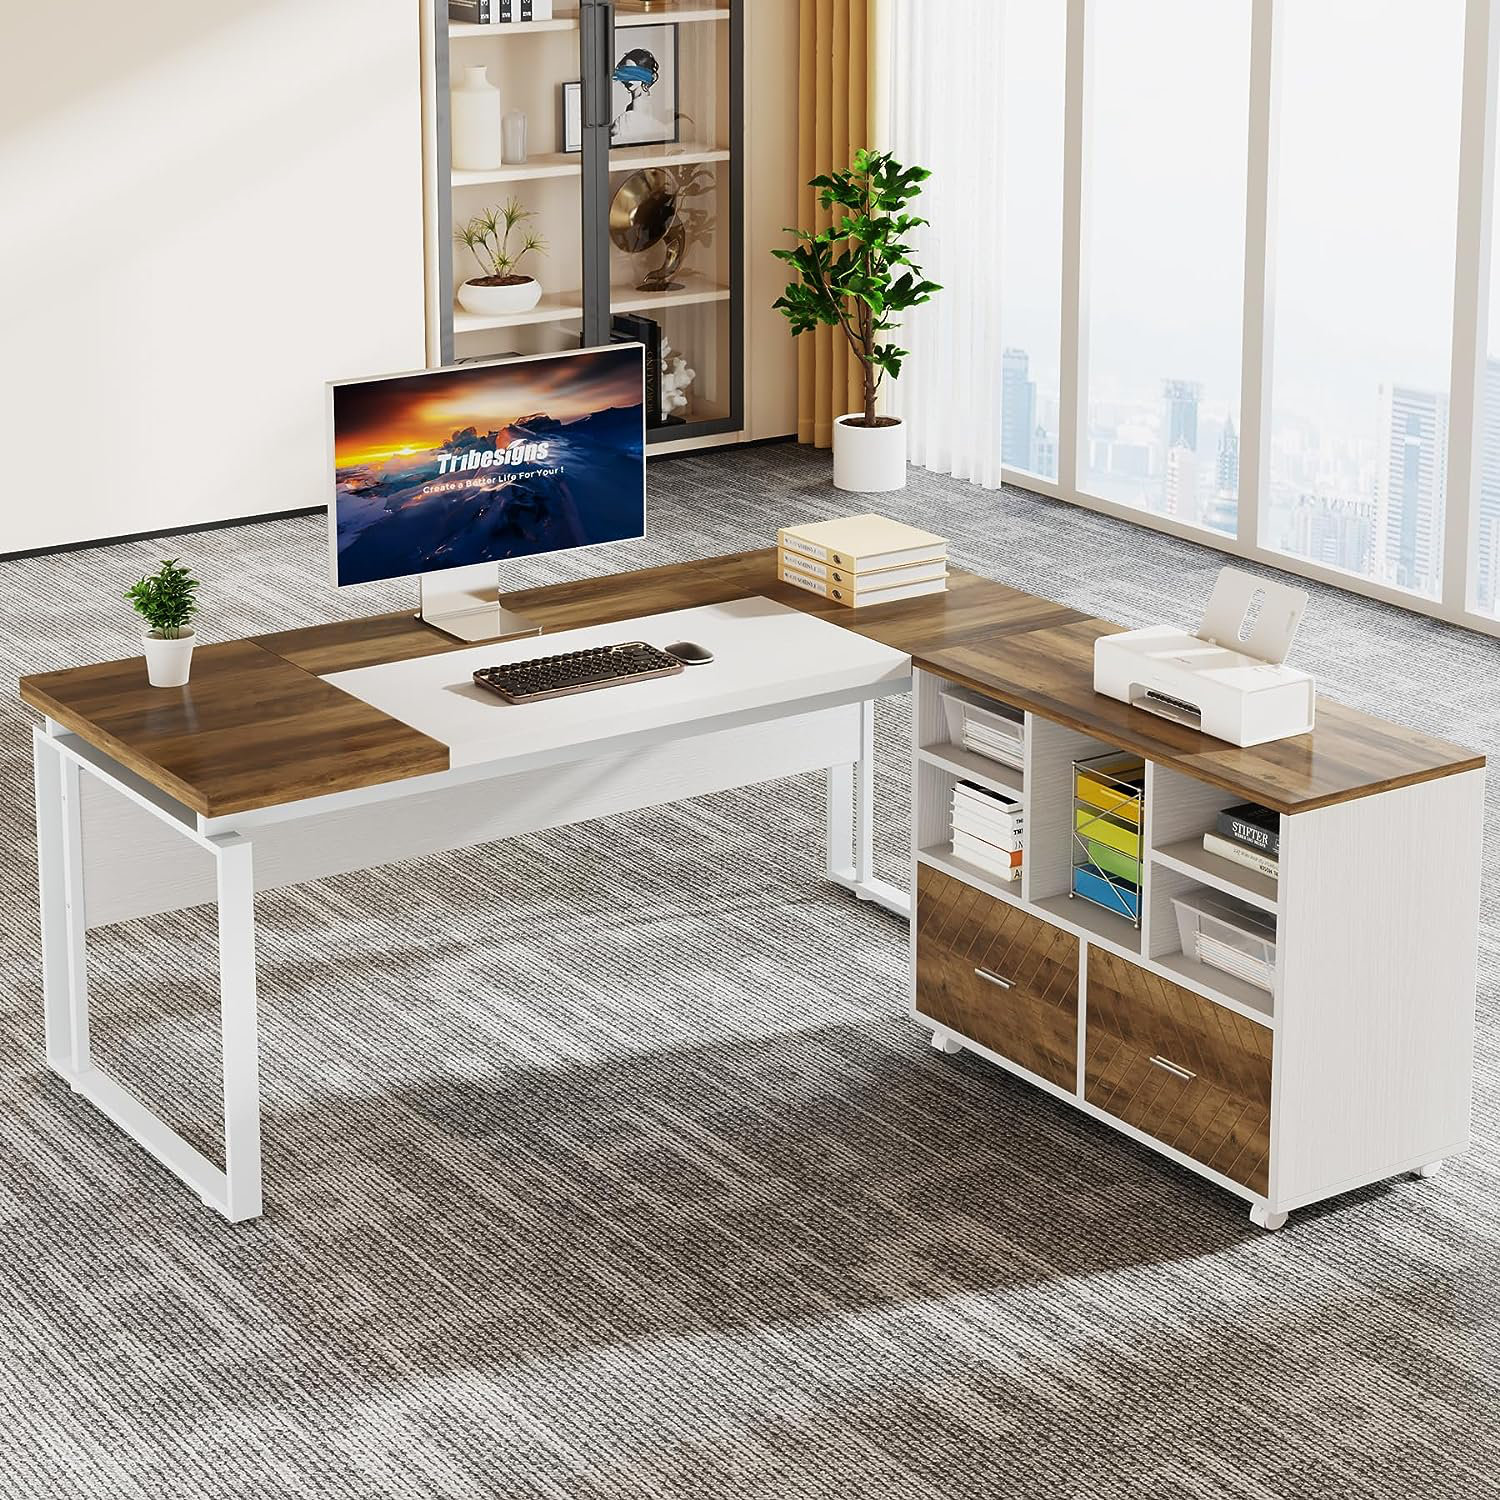 Executive Conference Desk Corner Drawers Modern Writing Office